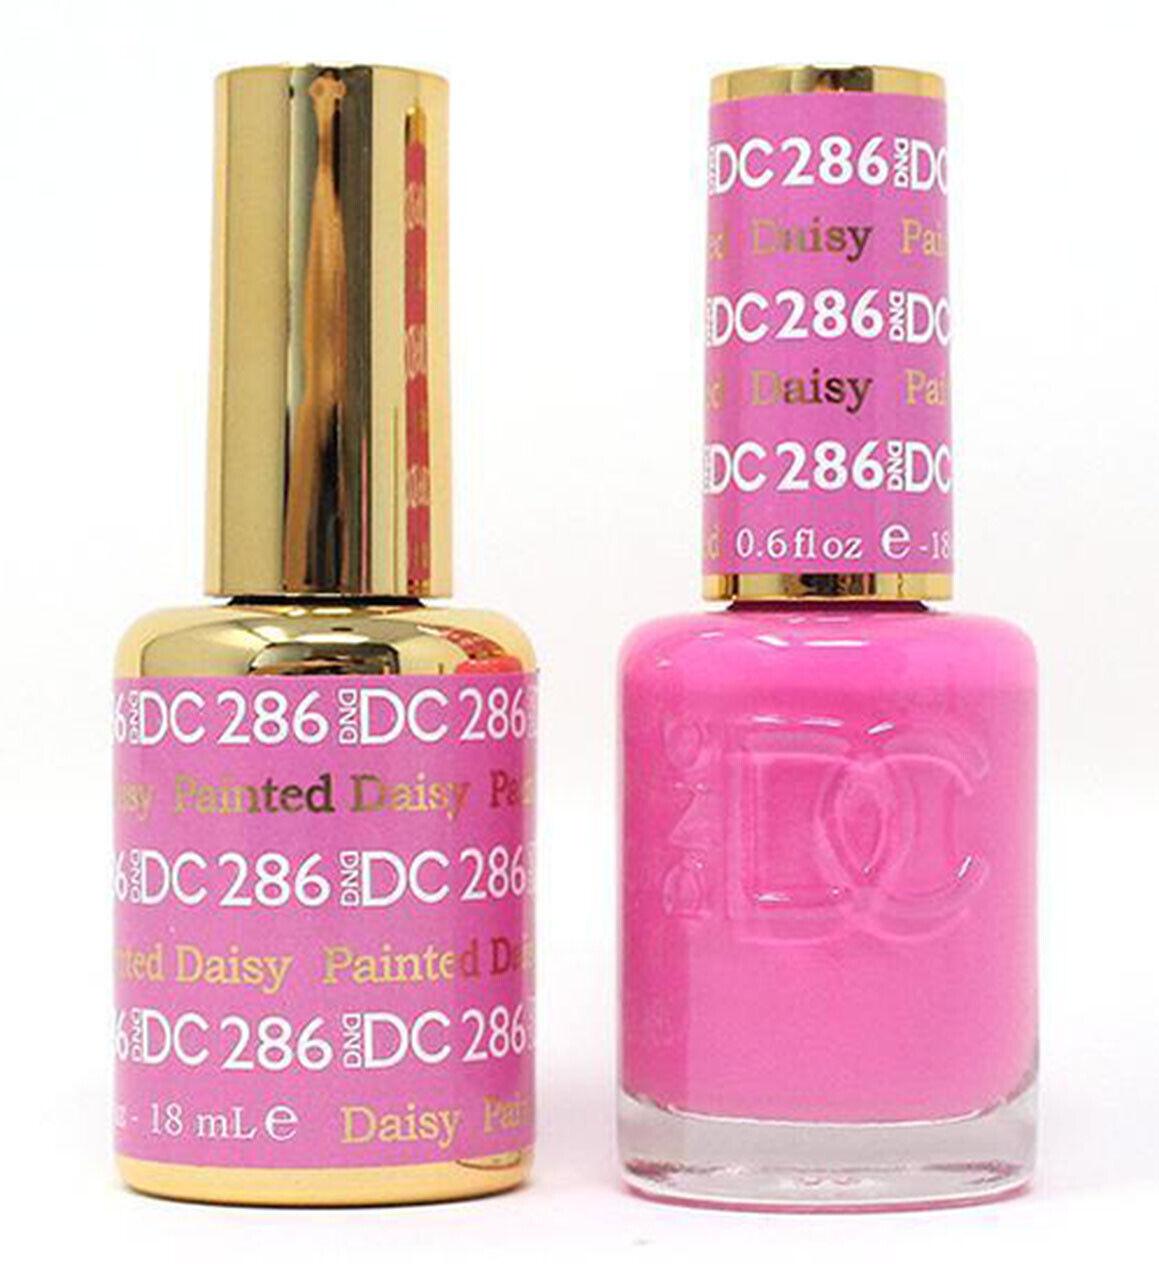 DND DC - Gel Polish & Matching Nail Lacquer Set - #286 PAINTED DAISY